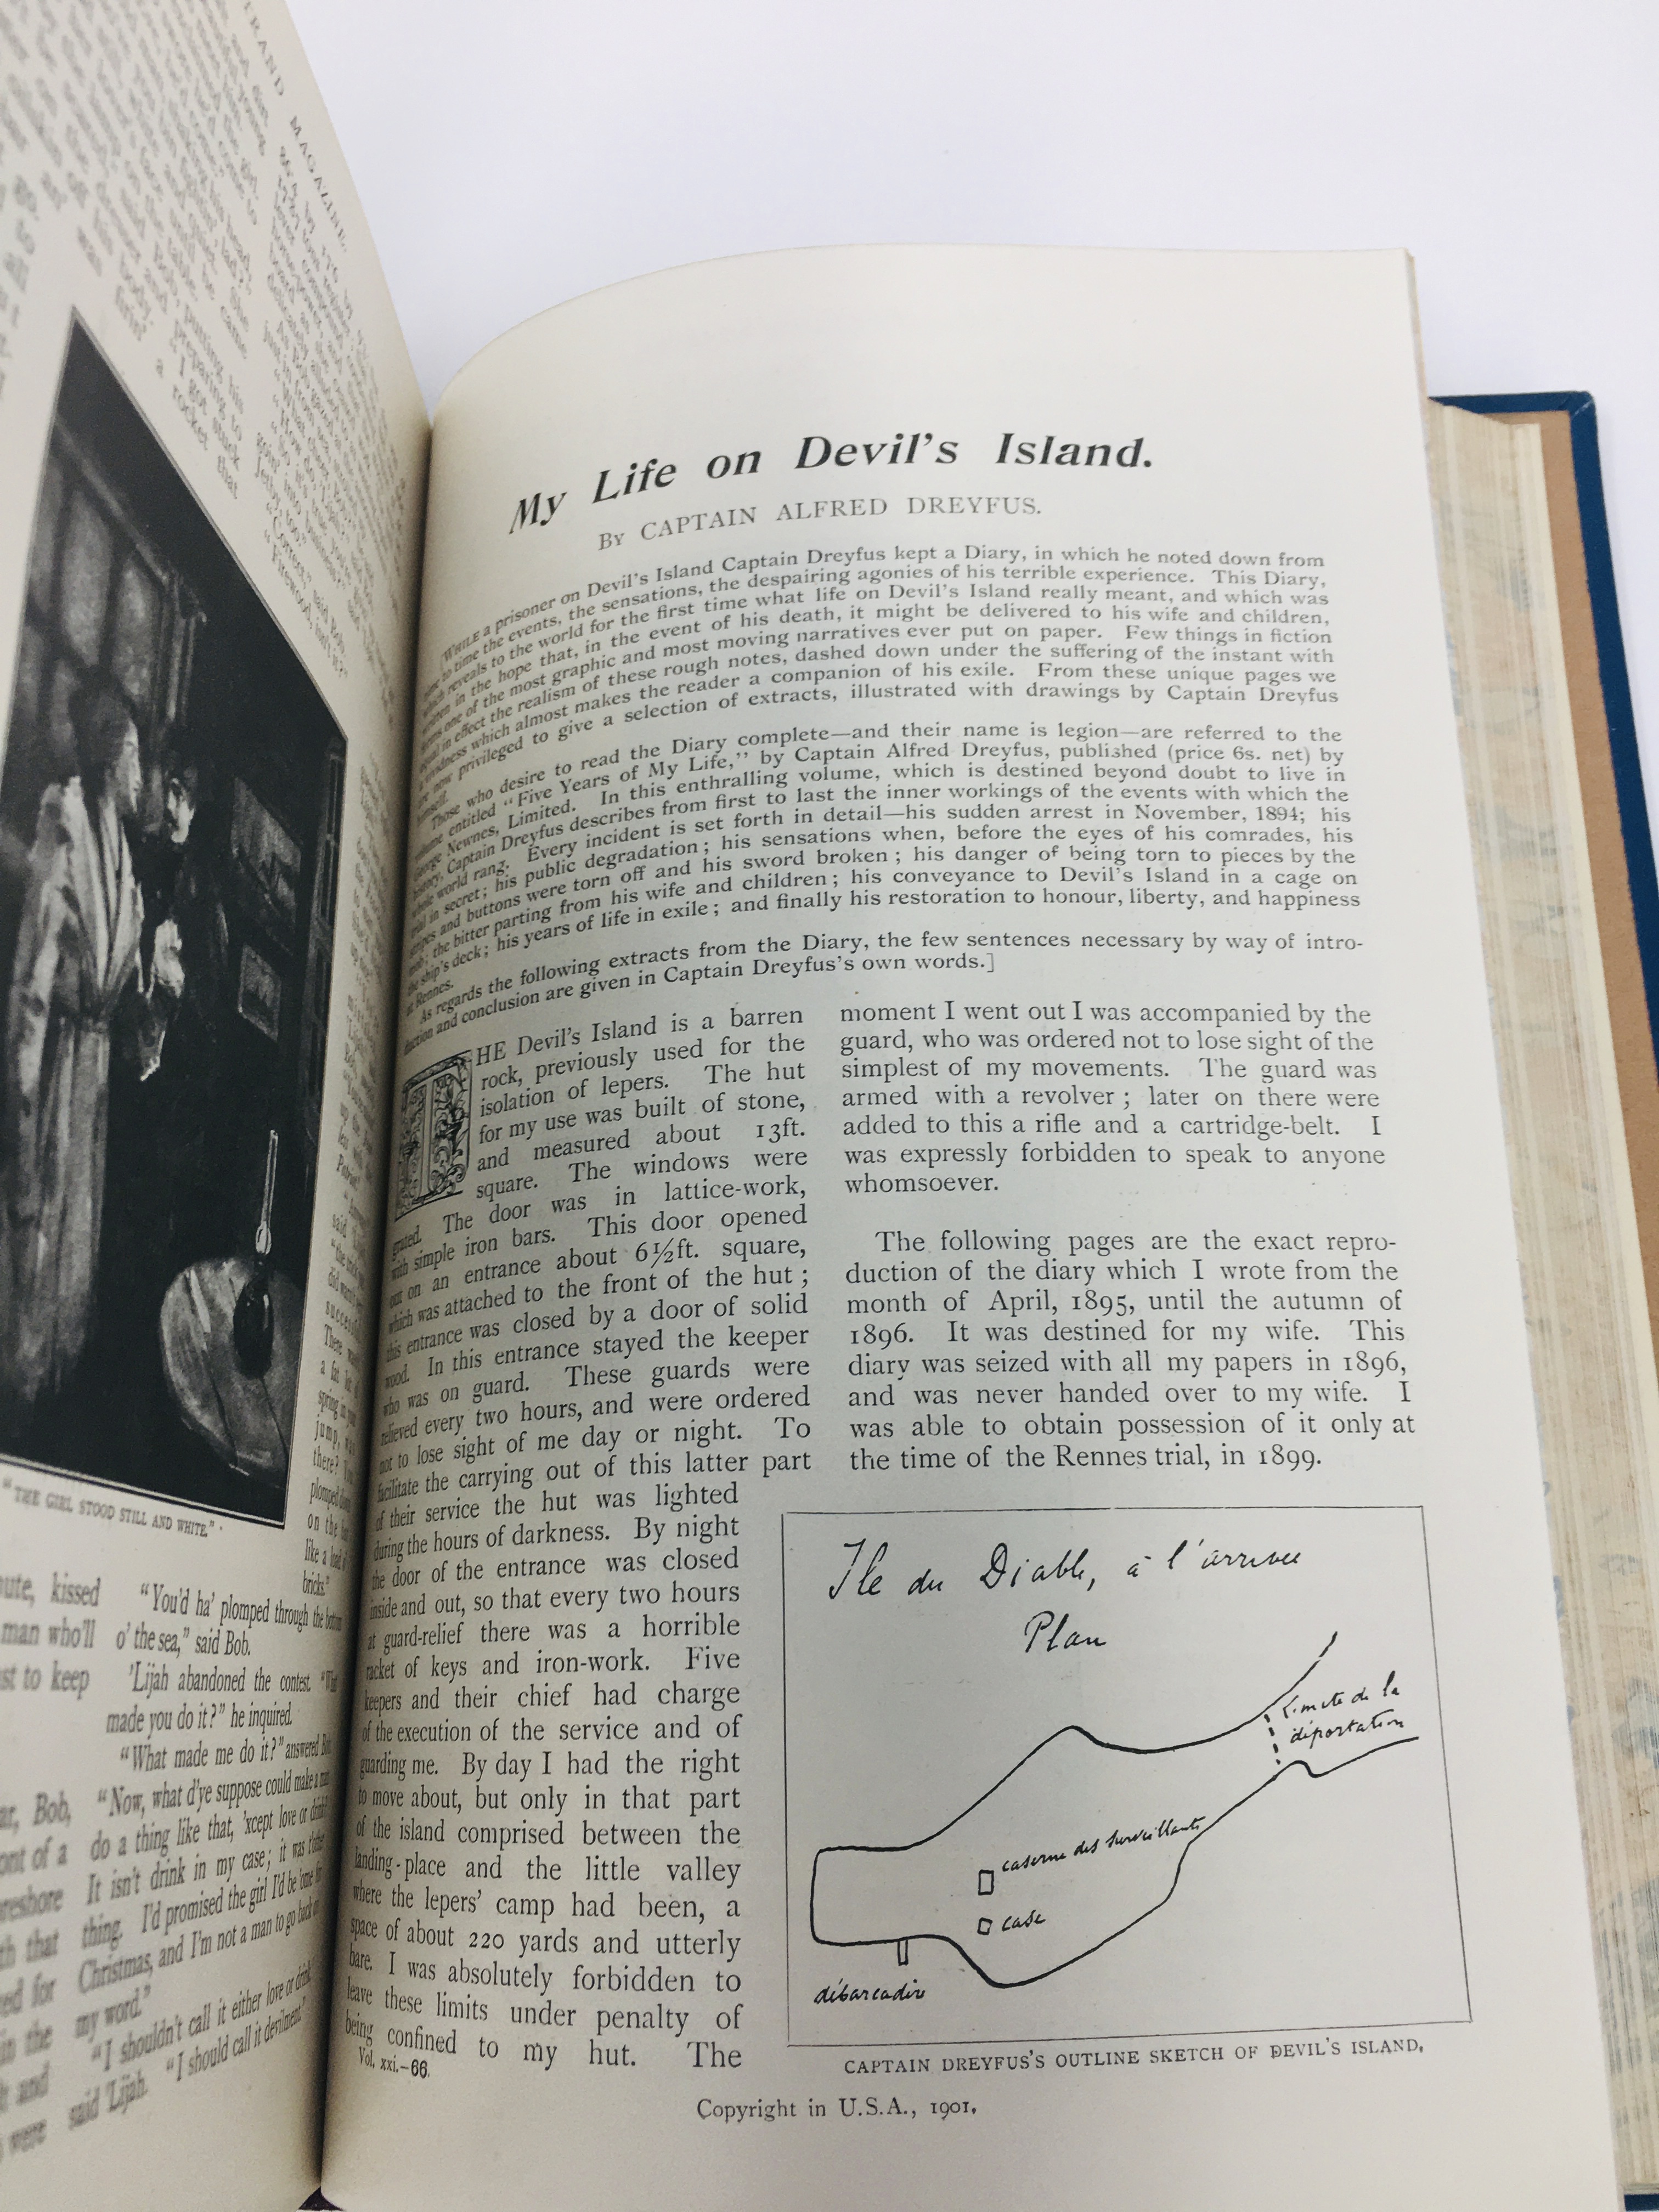 Dreyfus Affair - Book Collection featuring The Ben Shahn Prints (Limited First Edition) - Image 65 of 73